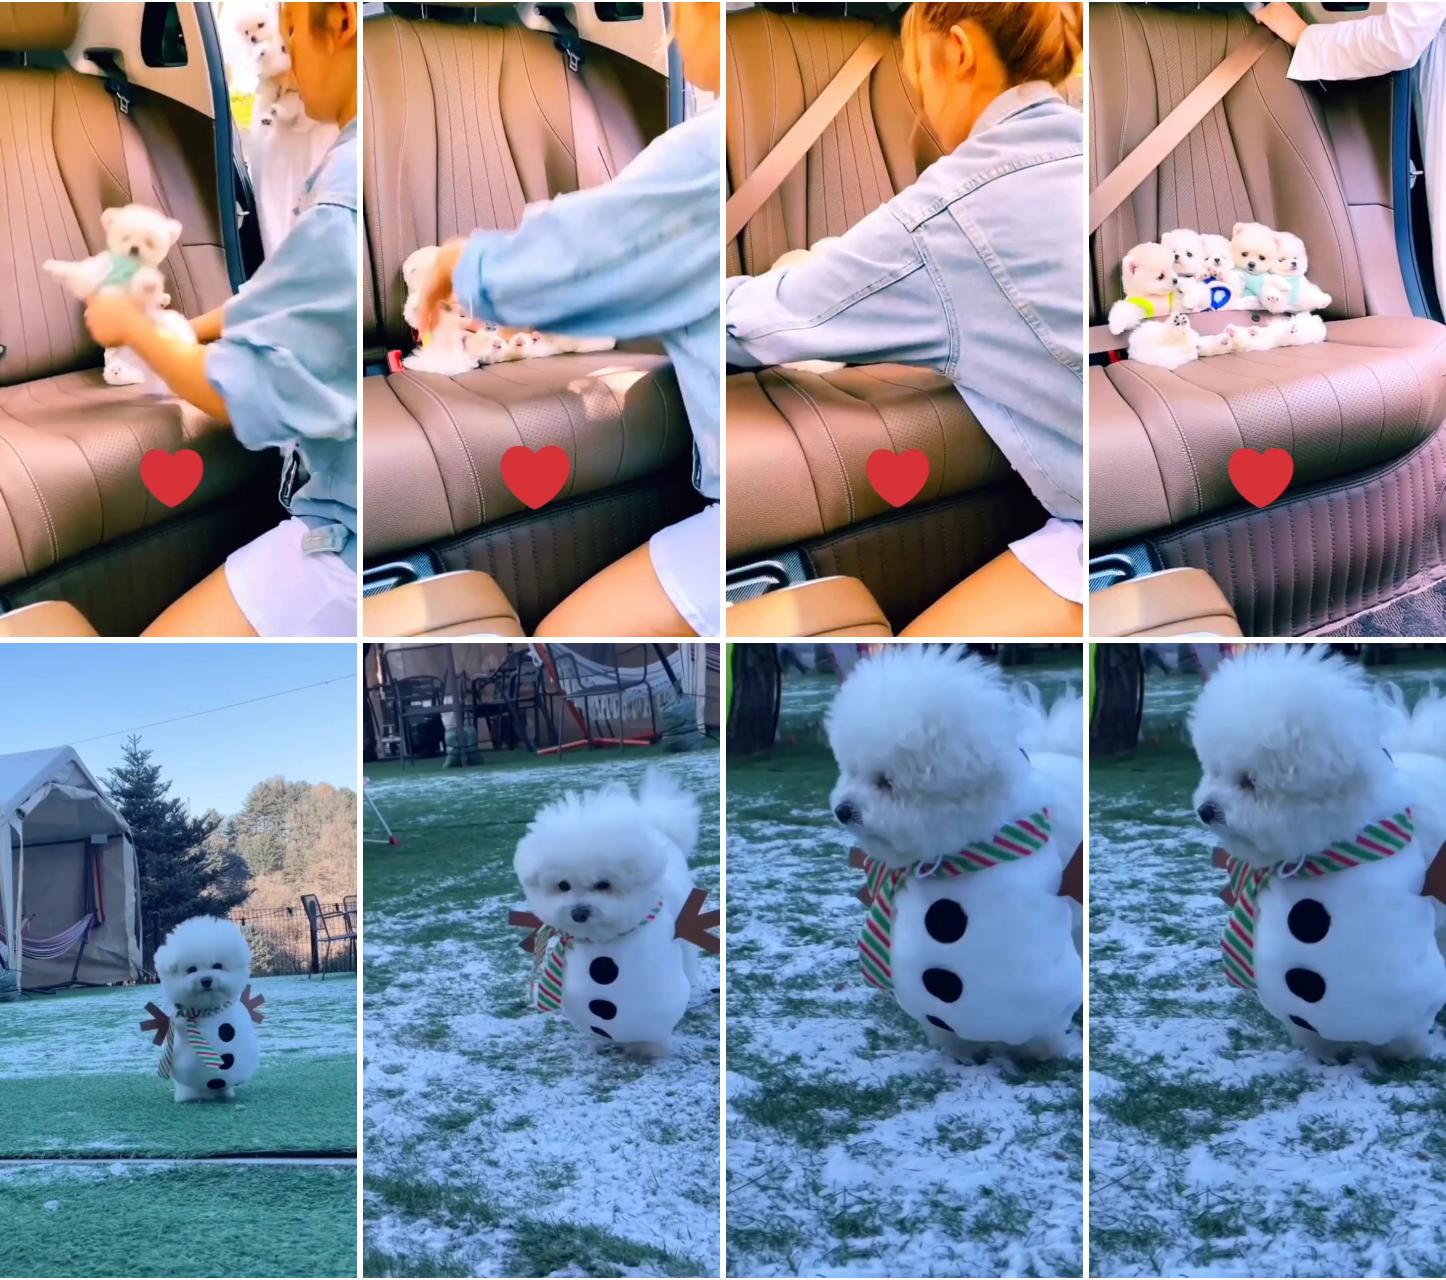 Cutest puppies ; here comes the snowman, dogs